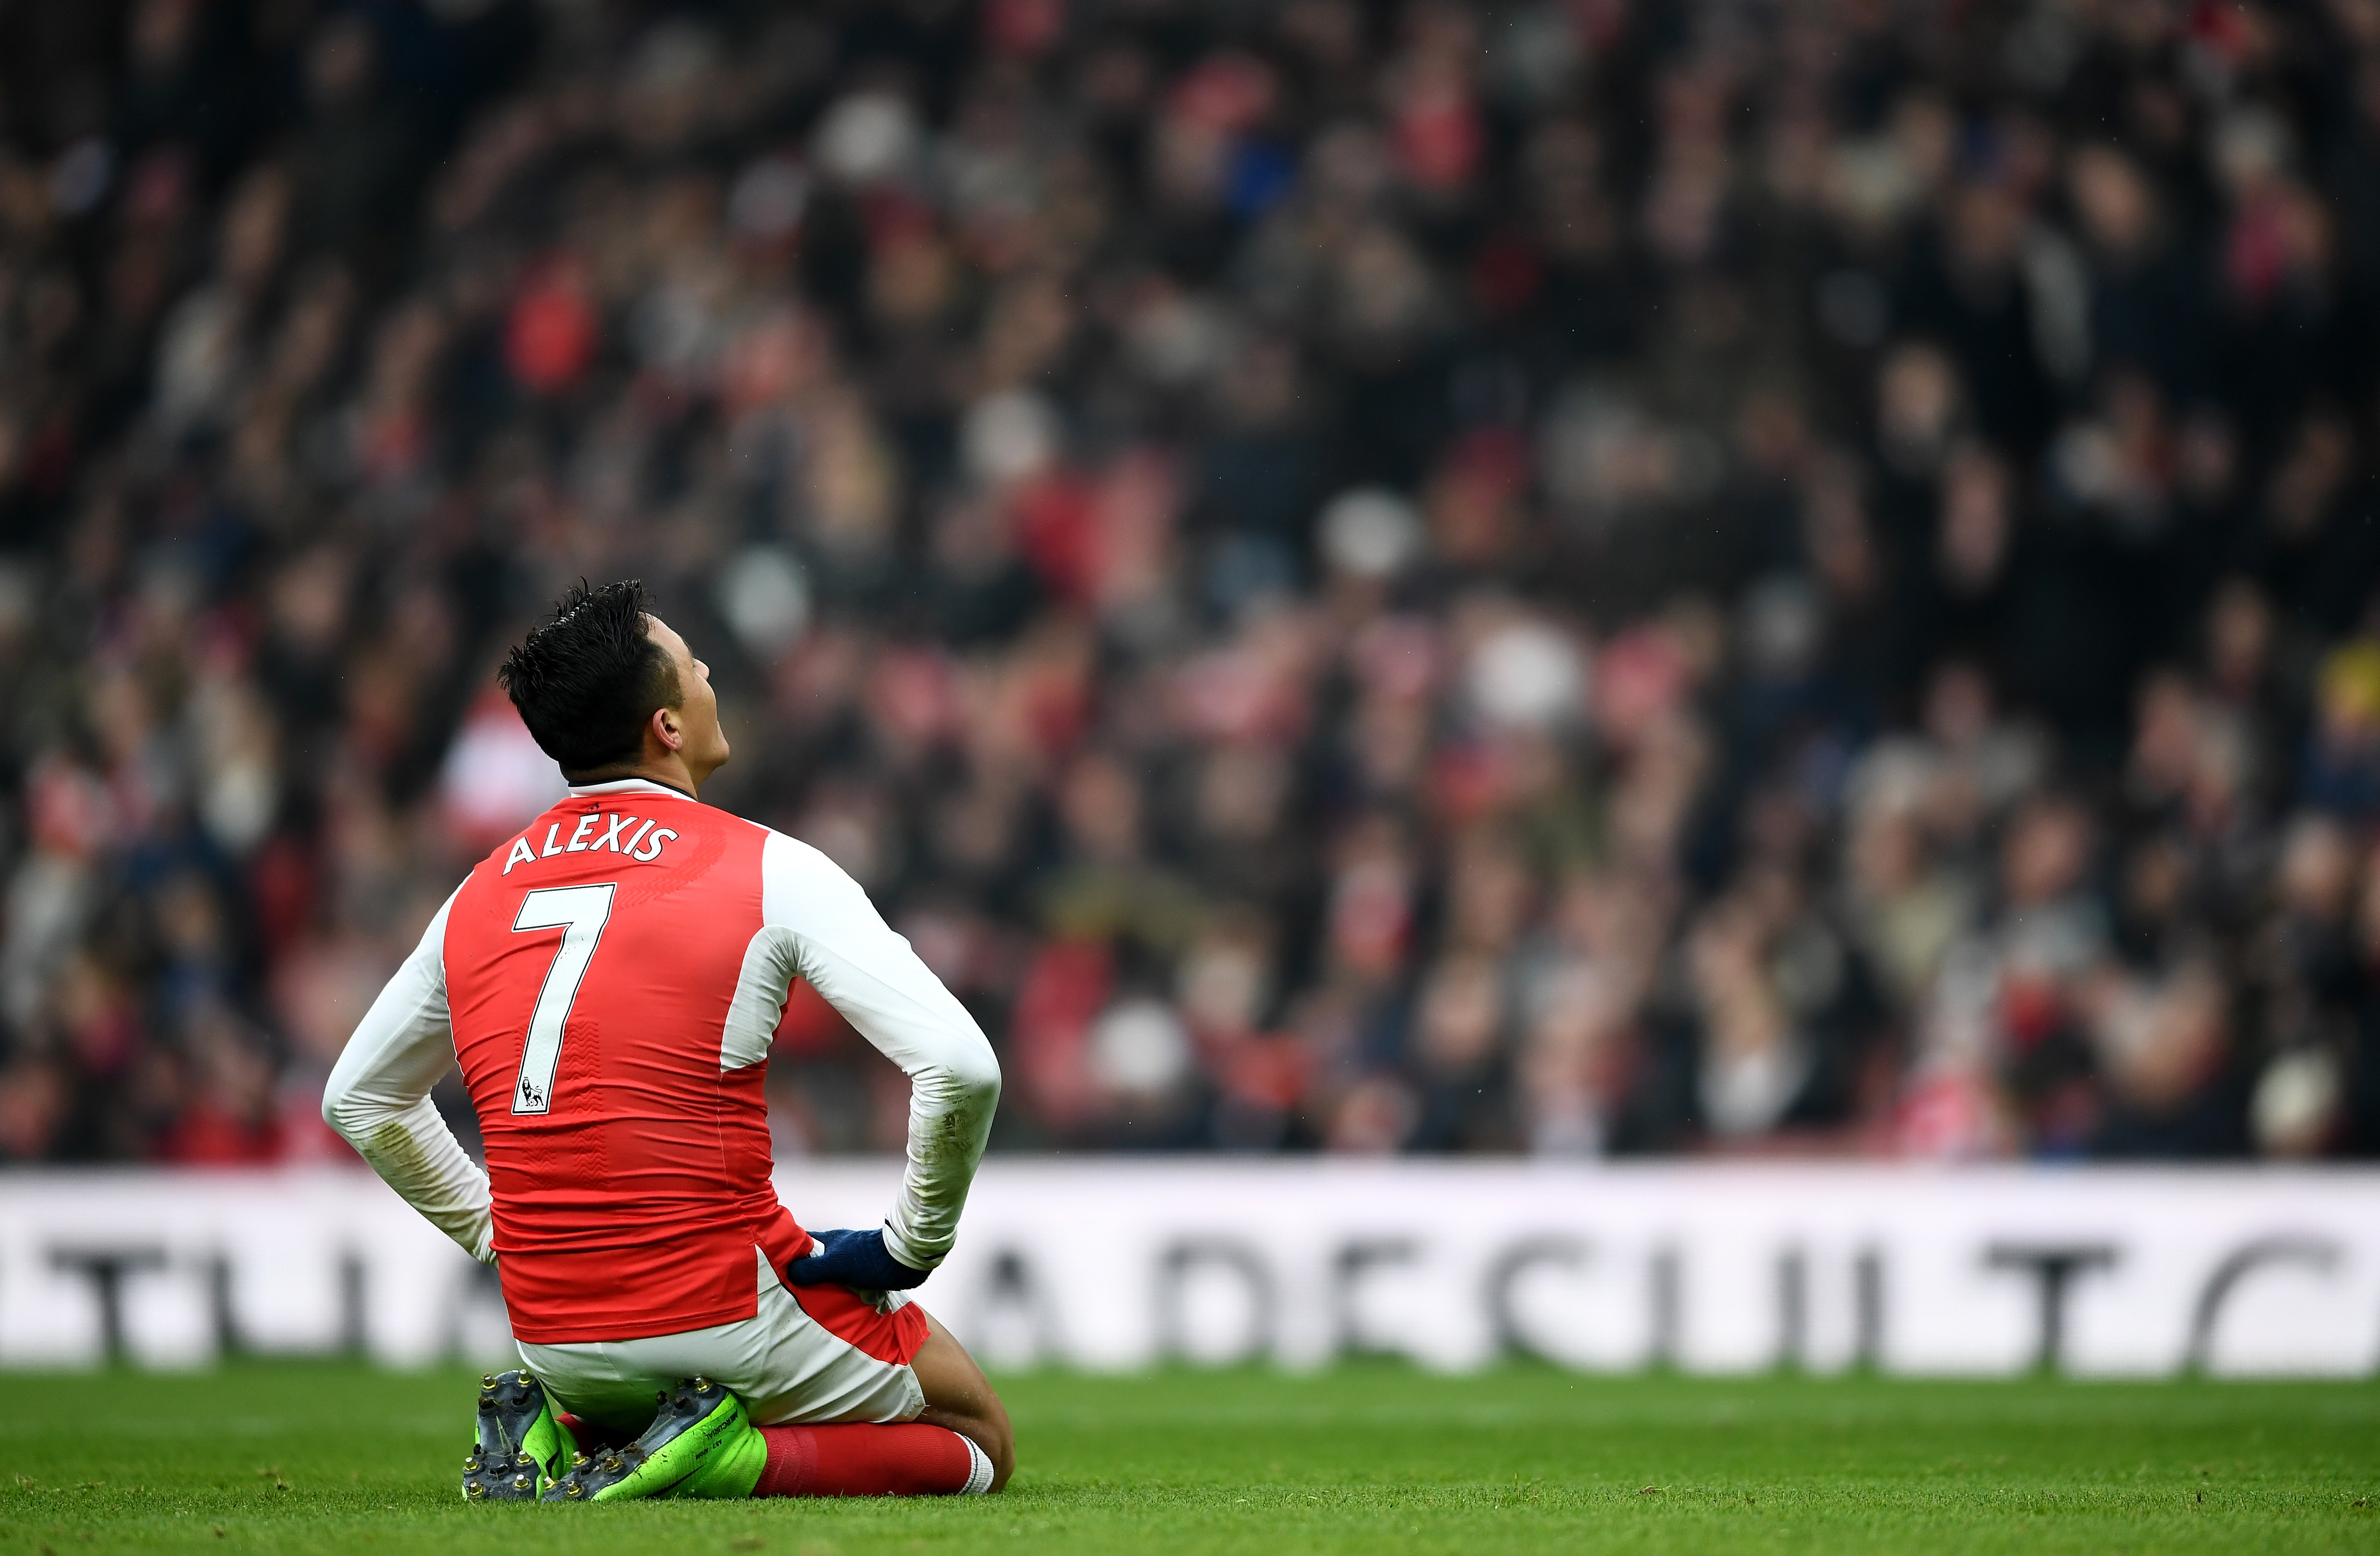 LONDON, ENGLAND - FEBRUARY 11: Alexis Sanchez of Arsenal reacts after missing a chance during the Premier League match between Arsenal and Hull City at Emirates Stadium on February 11, 2017 in London, England.  (Photo by Laurence Griffiths/Getty Images)